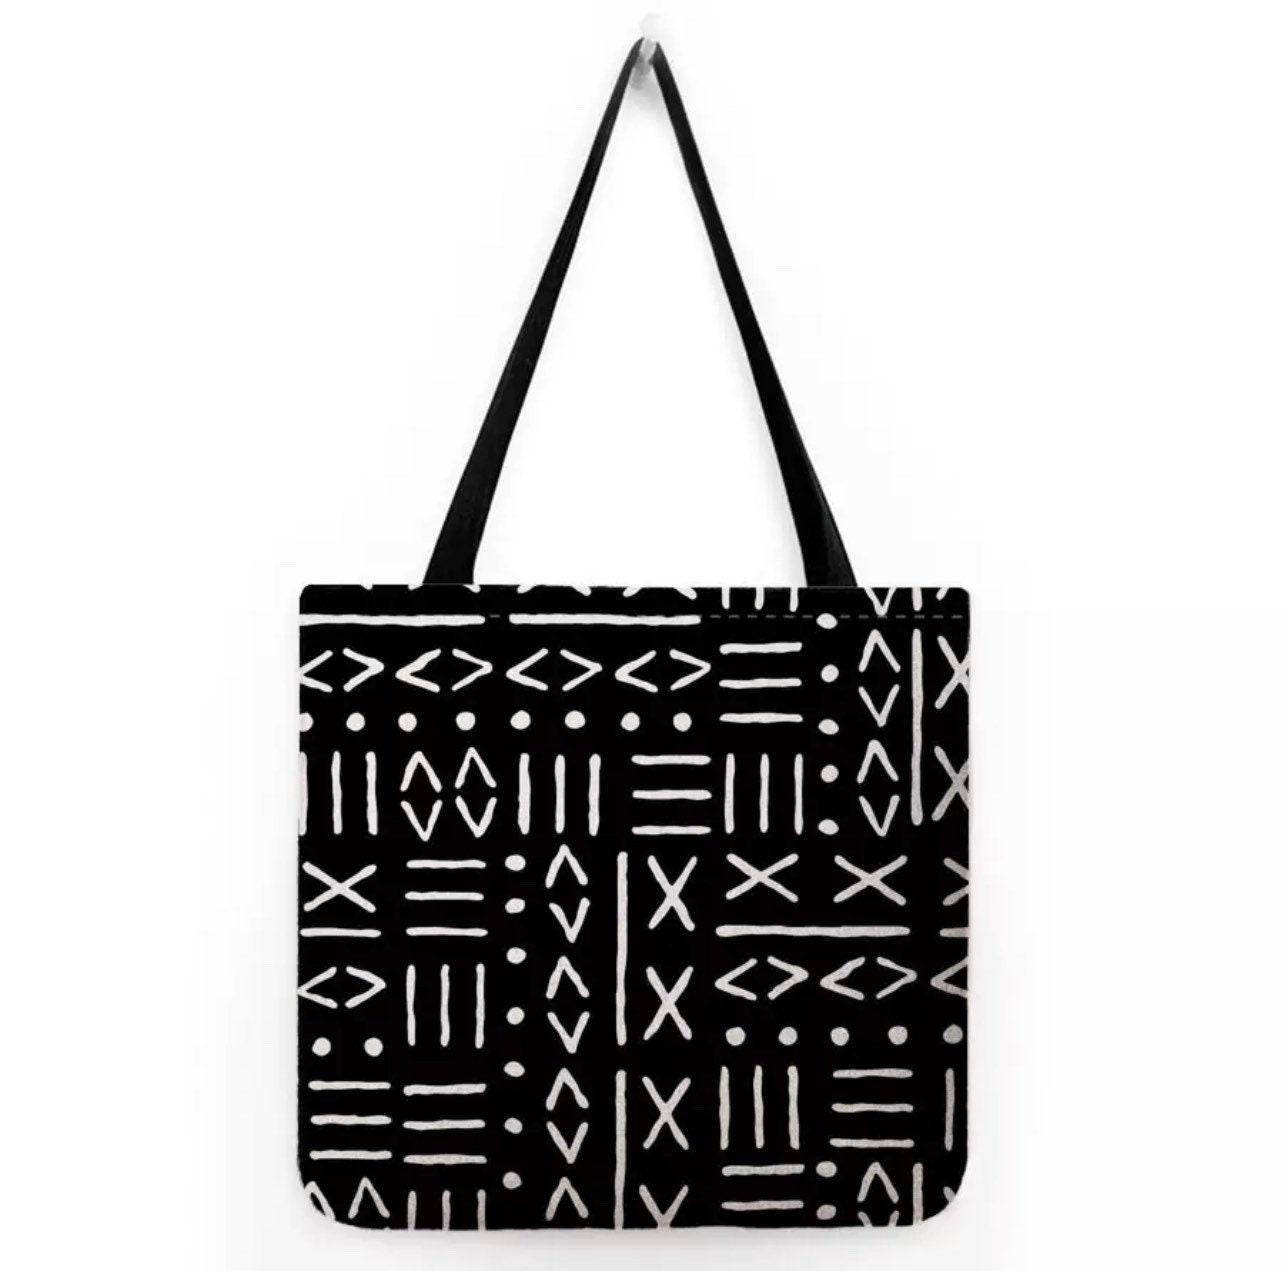 Maasai Mara Women Tribal Jewelry Print, Tote Bag, Shopping, Hold Everything, African Style, Kenyan, PhotoShatts Print, Gift for Accessories